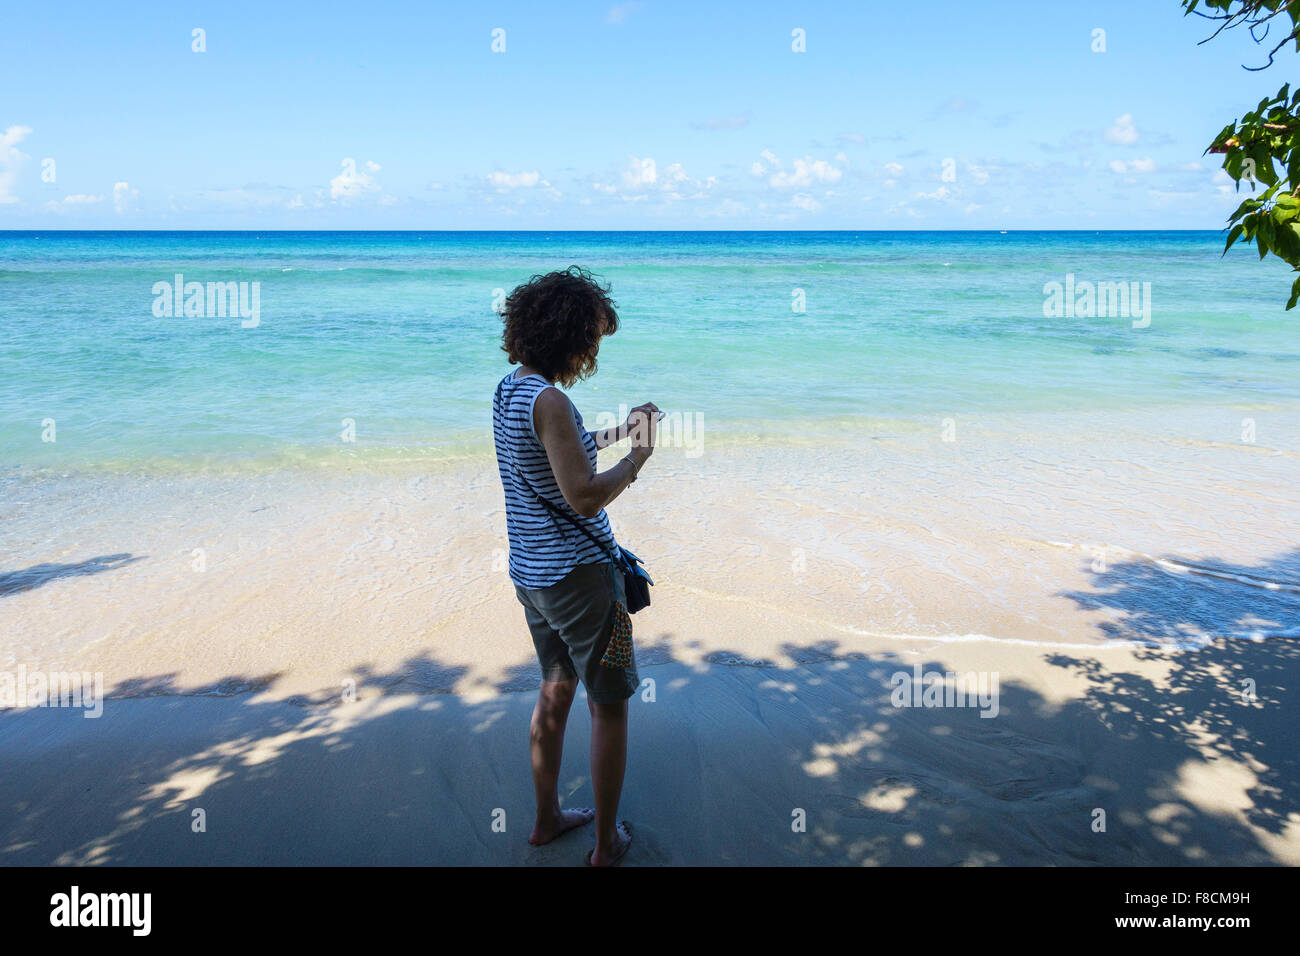 A 50 year old woman looks at her photographs of the Caribbean, St. Croix, U.S. Virgin Islands. Stock Photo